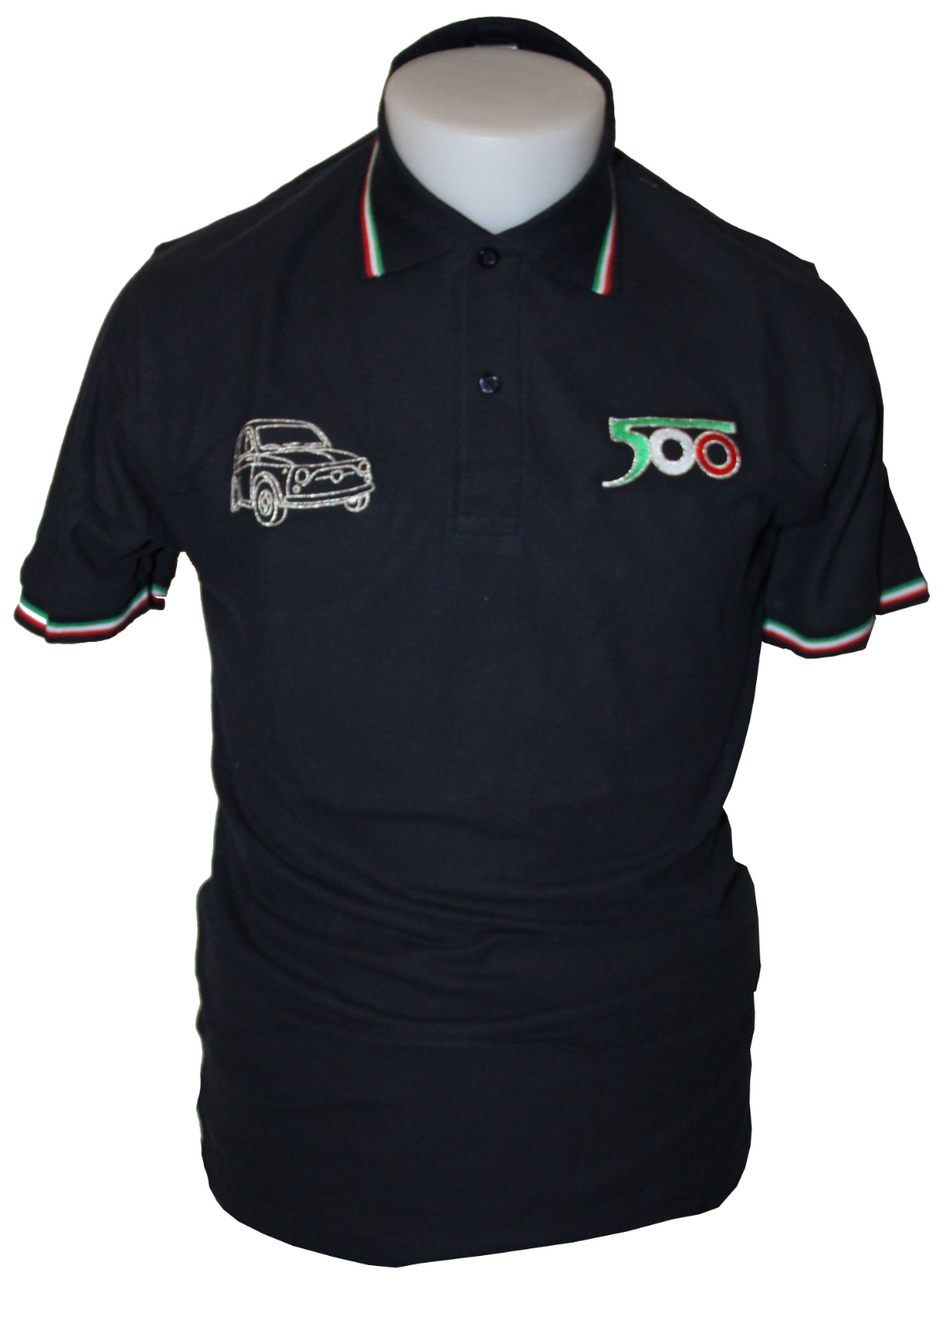 FIAT 500 POLO T-SHIRT - Brand New - Made In Italy